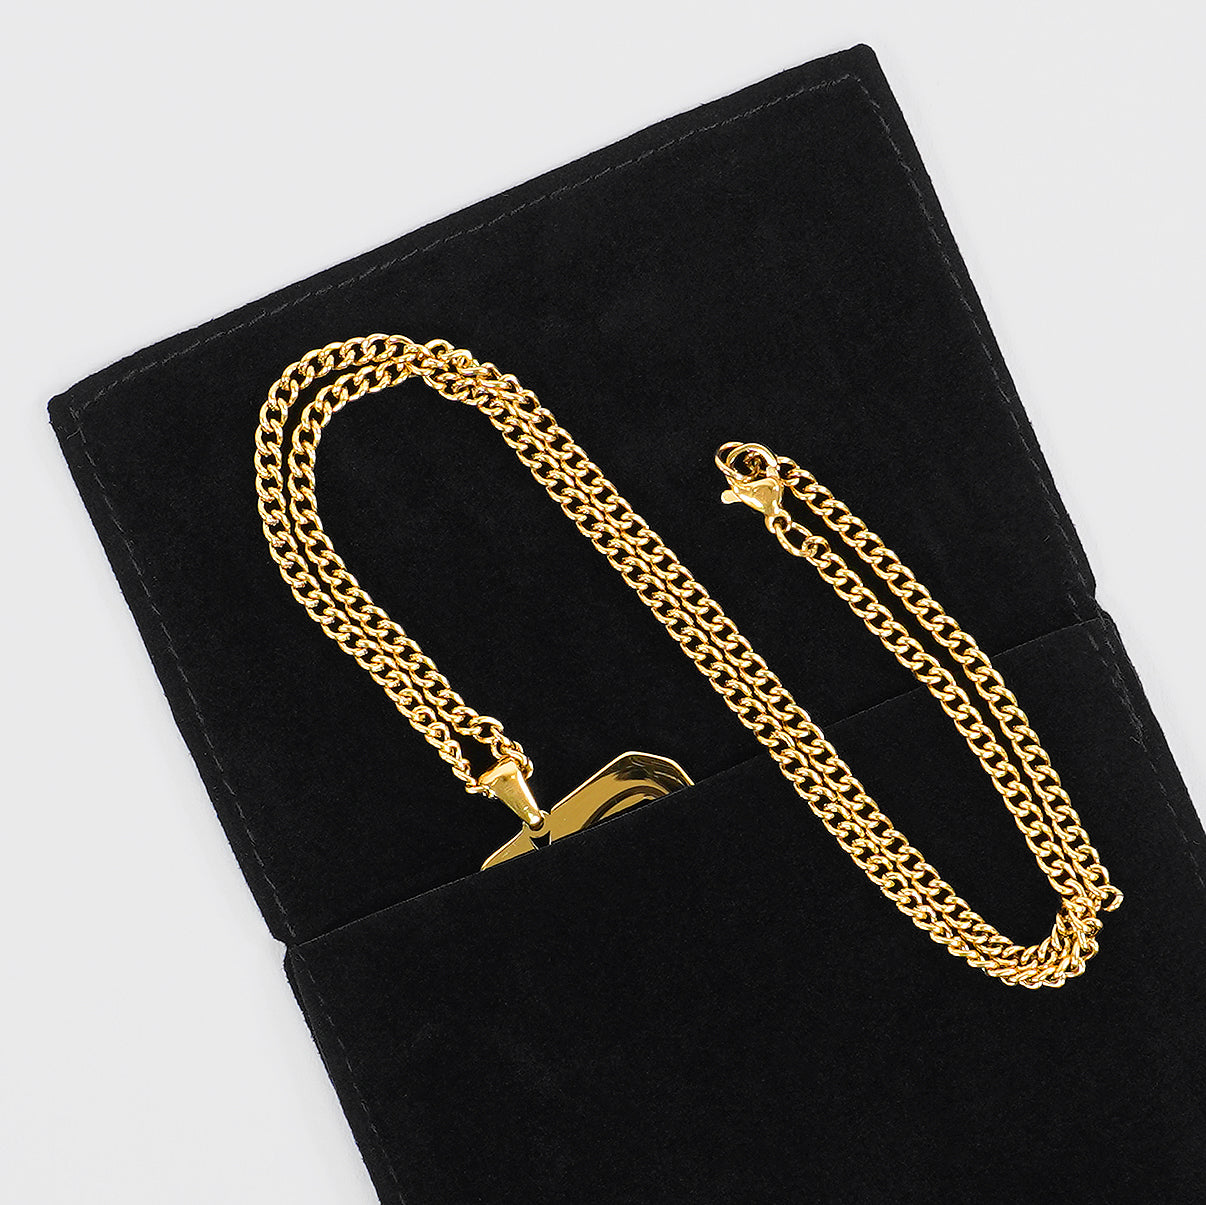 88 Number Pendant with Chain Necklace - Gold Plated Stainless Steel